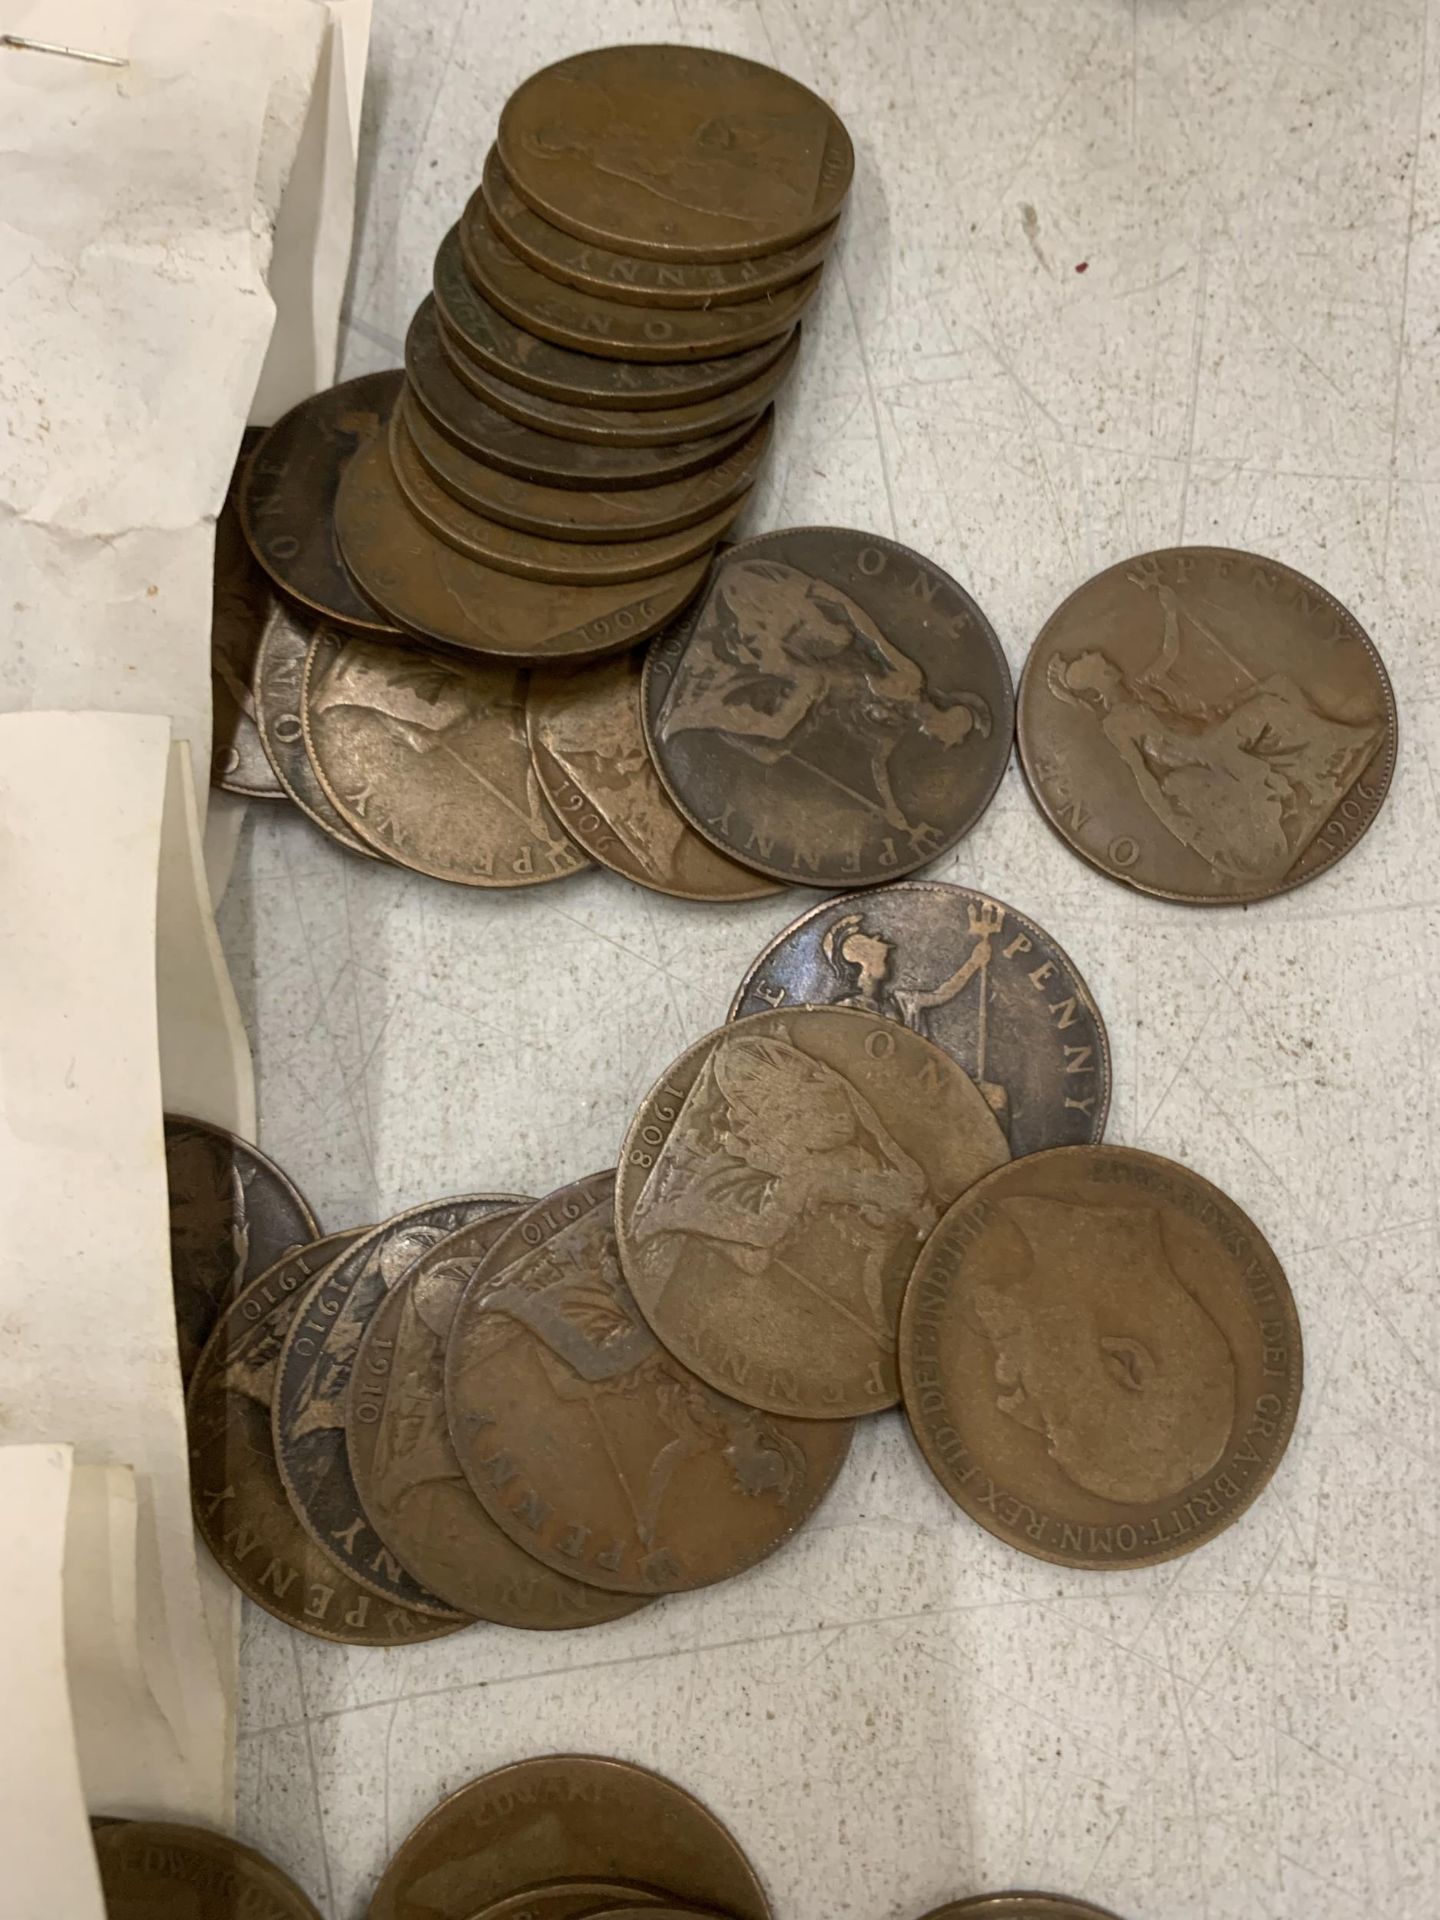 A QUANTITY OF VINTAGE PENNIES 1902, 1903, 1904, 1905, 1906, 1907, 1908, 1909 AND 1910 - Image 4 of 4